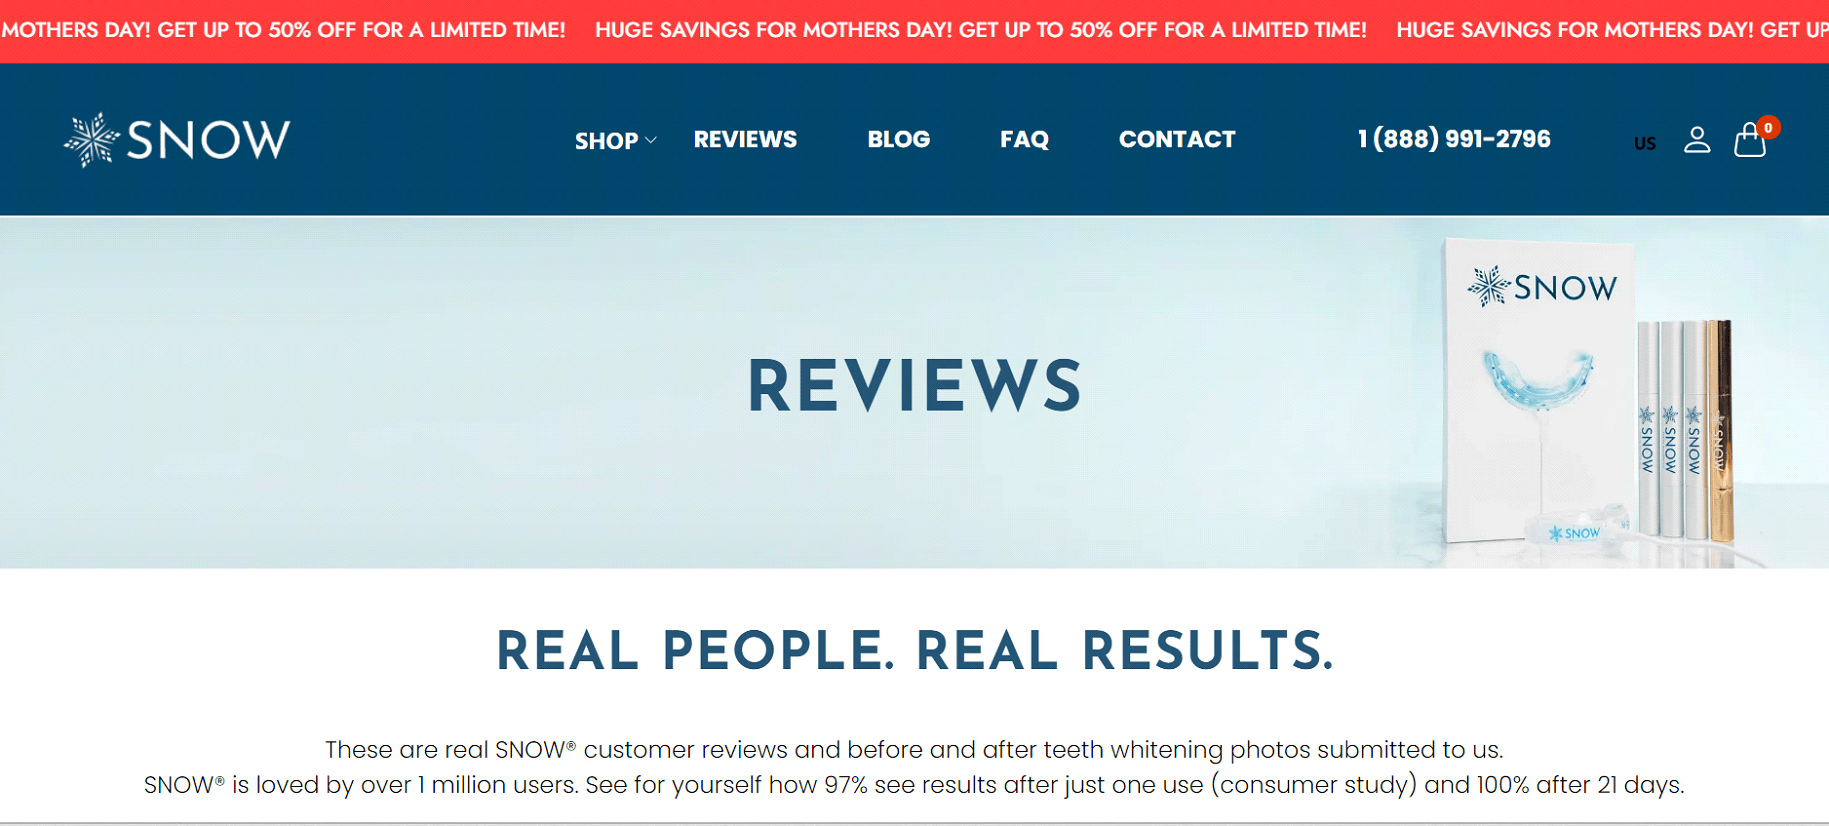 Snow with their dedicated and well-designed Shopify reviews page